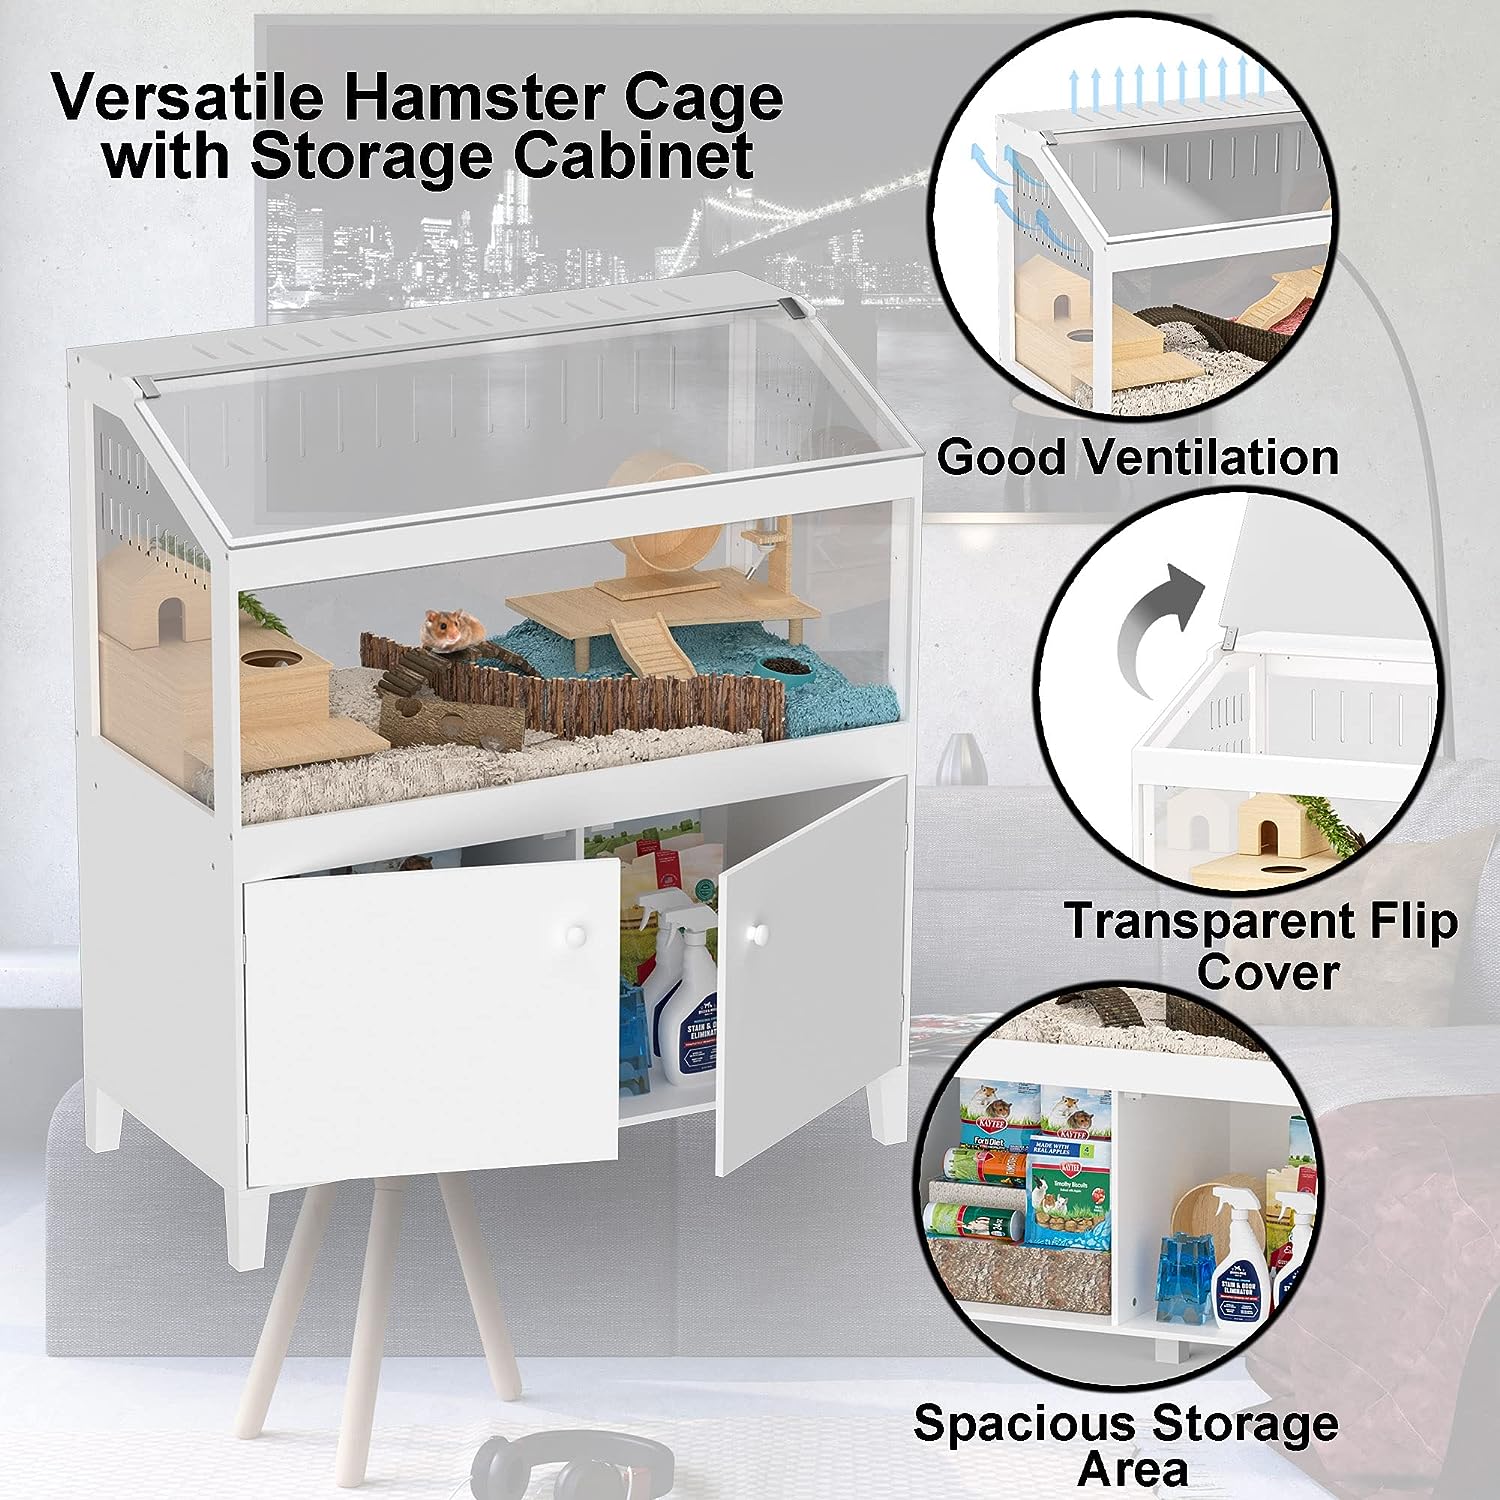  GDLF Organization and Storage Cabinet Compatible with